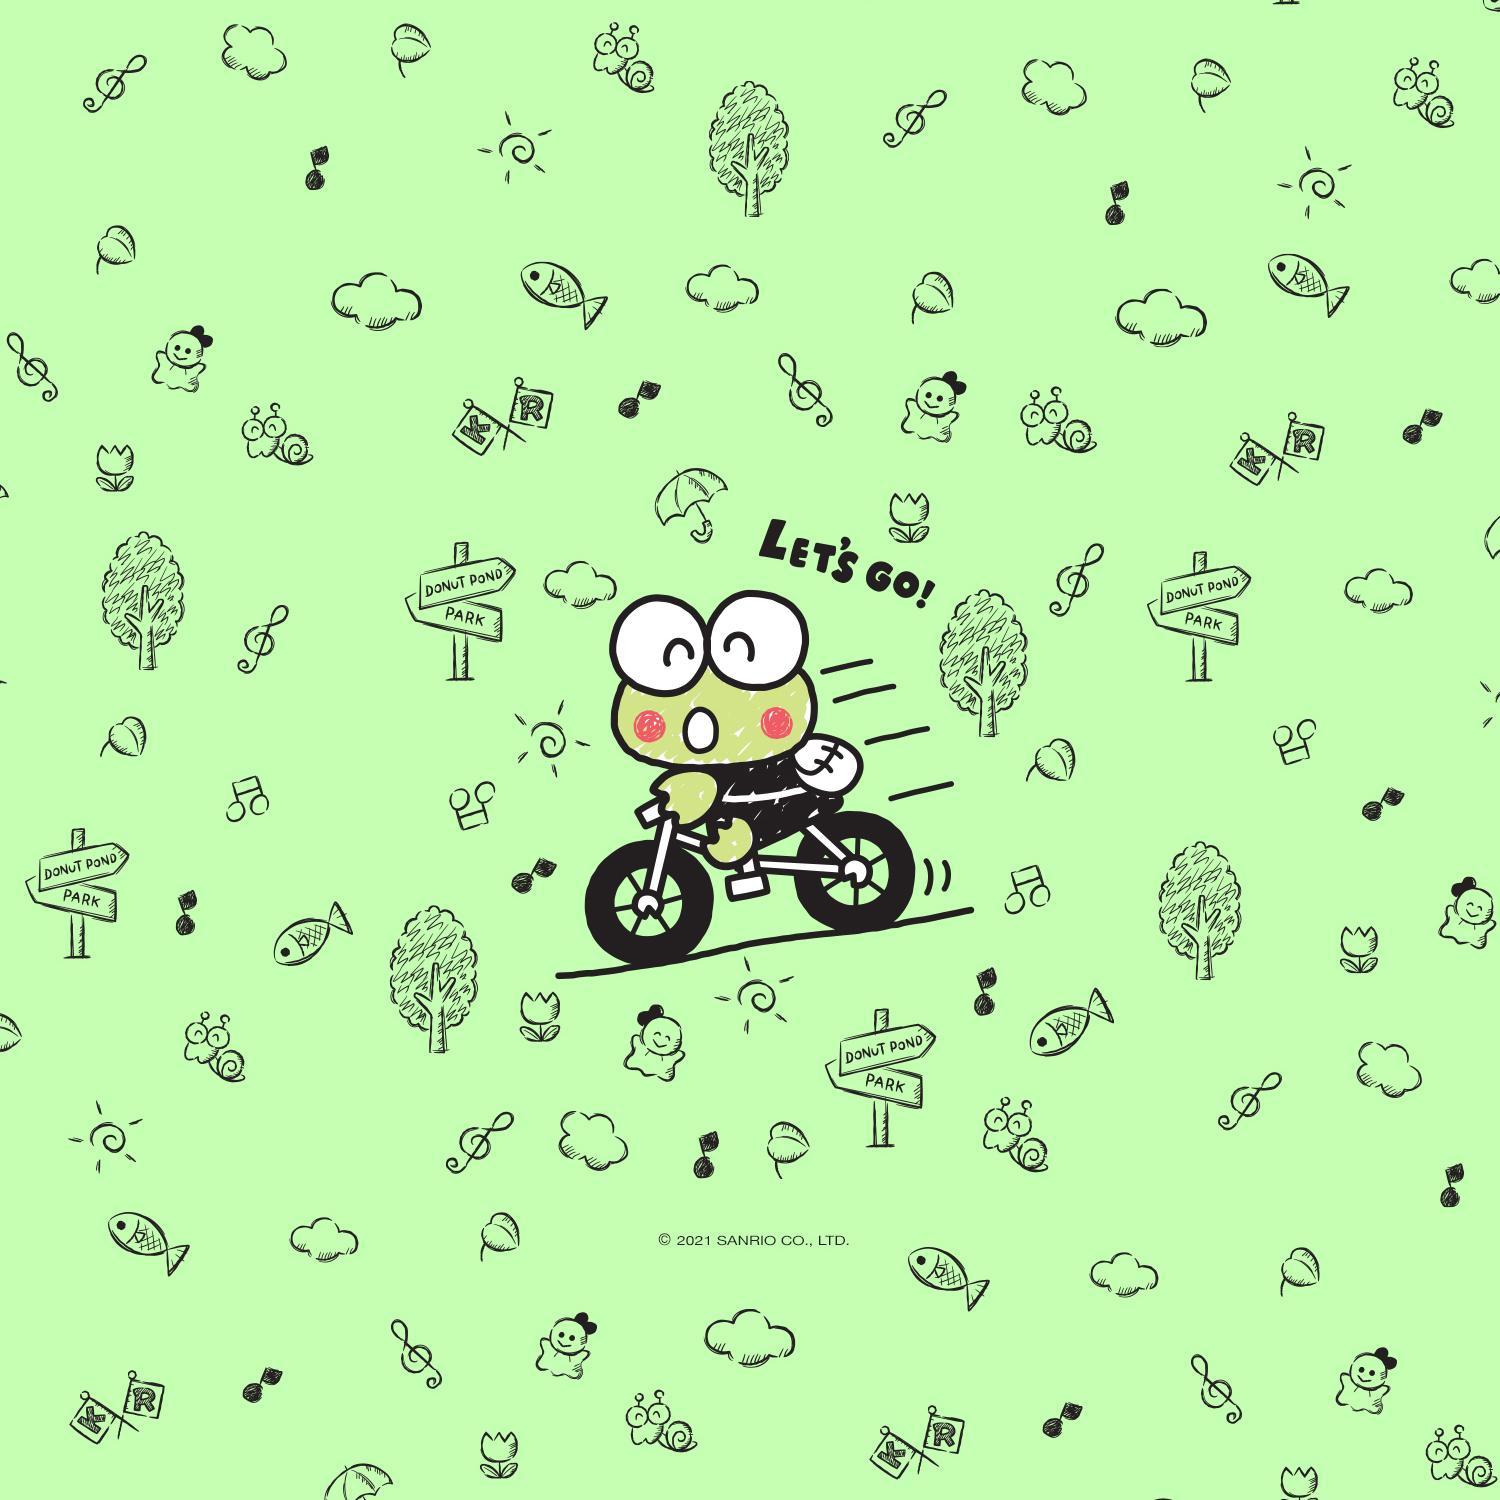 Sanrio on take keroppi on the go with new backgrounds for your phoneðð download your favorite wallpaper here httpstcoxmpsmbej sanriofotm httpstcofrmppzjci